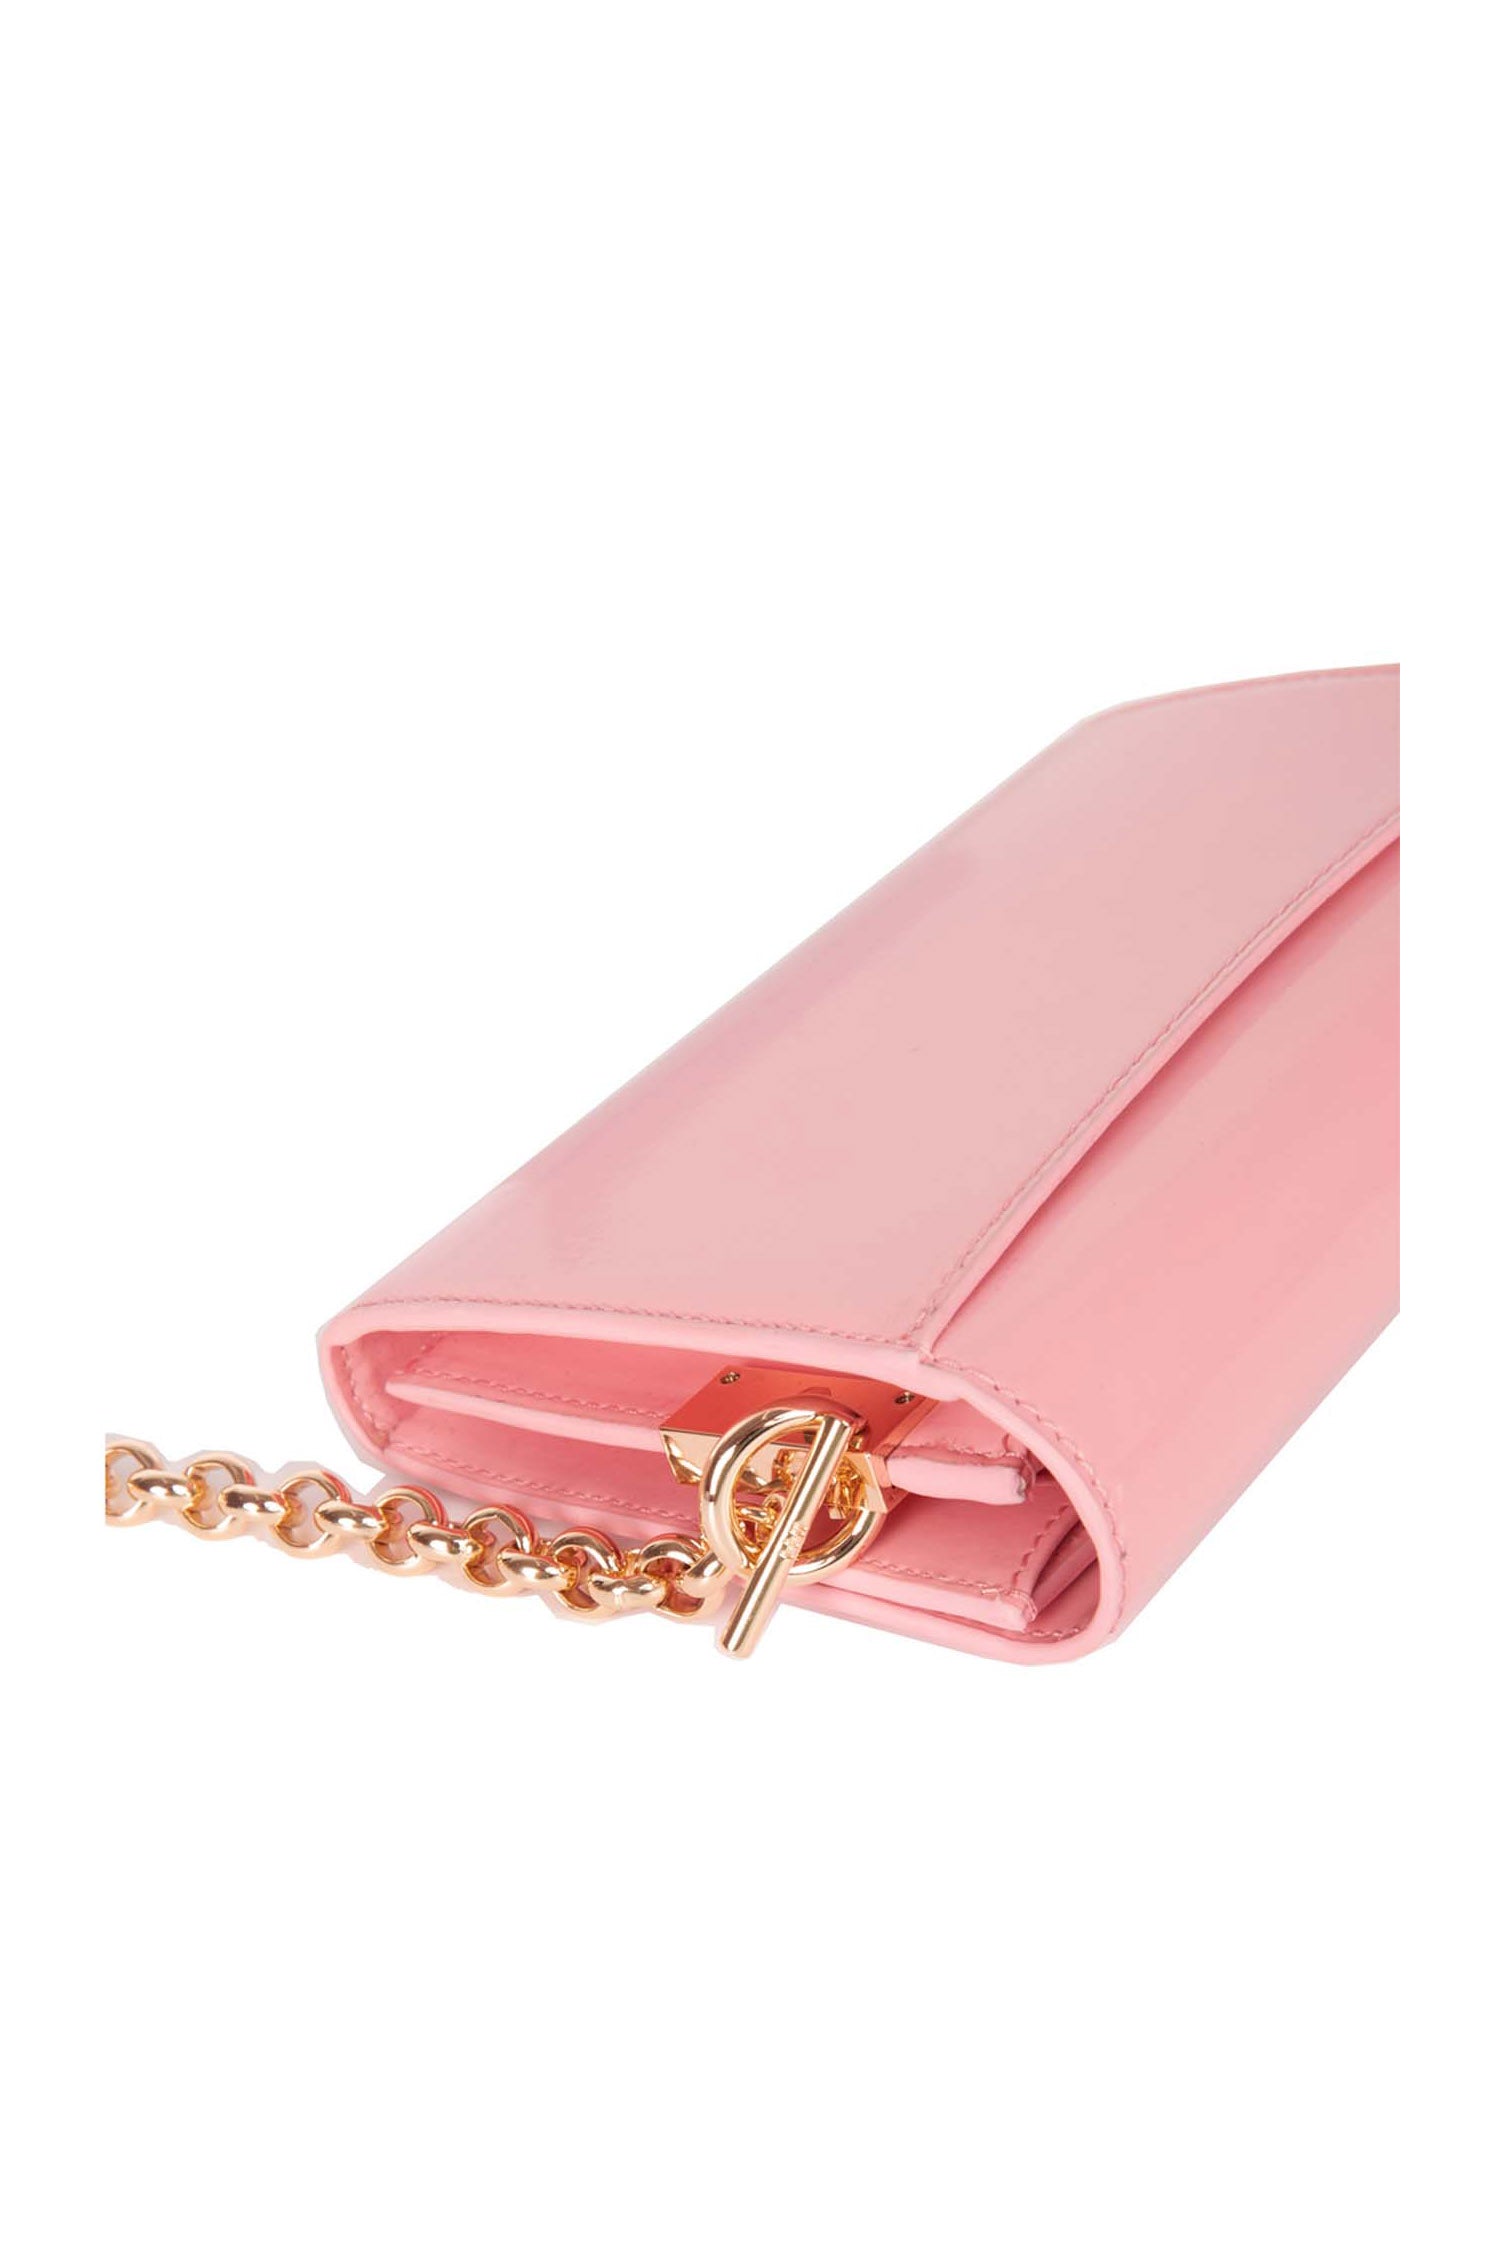 SAMPLE - The Juicy Patent Phone Wallet Candy Pink